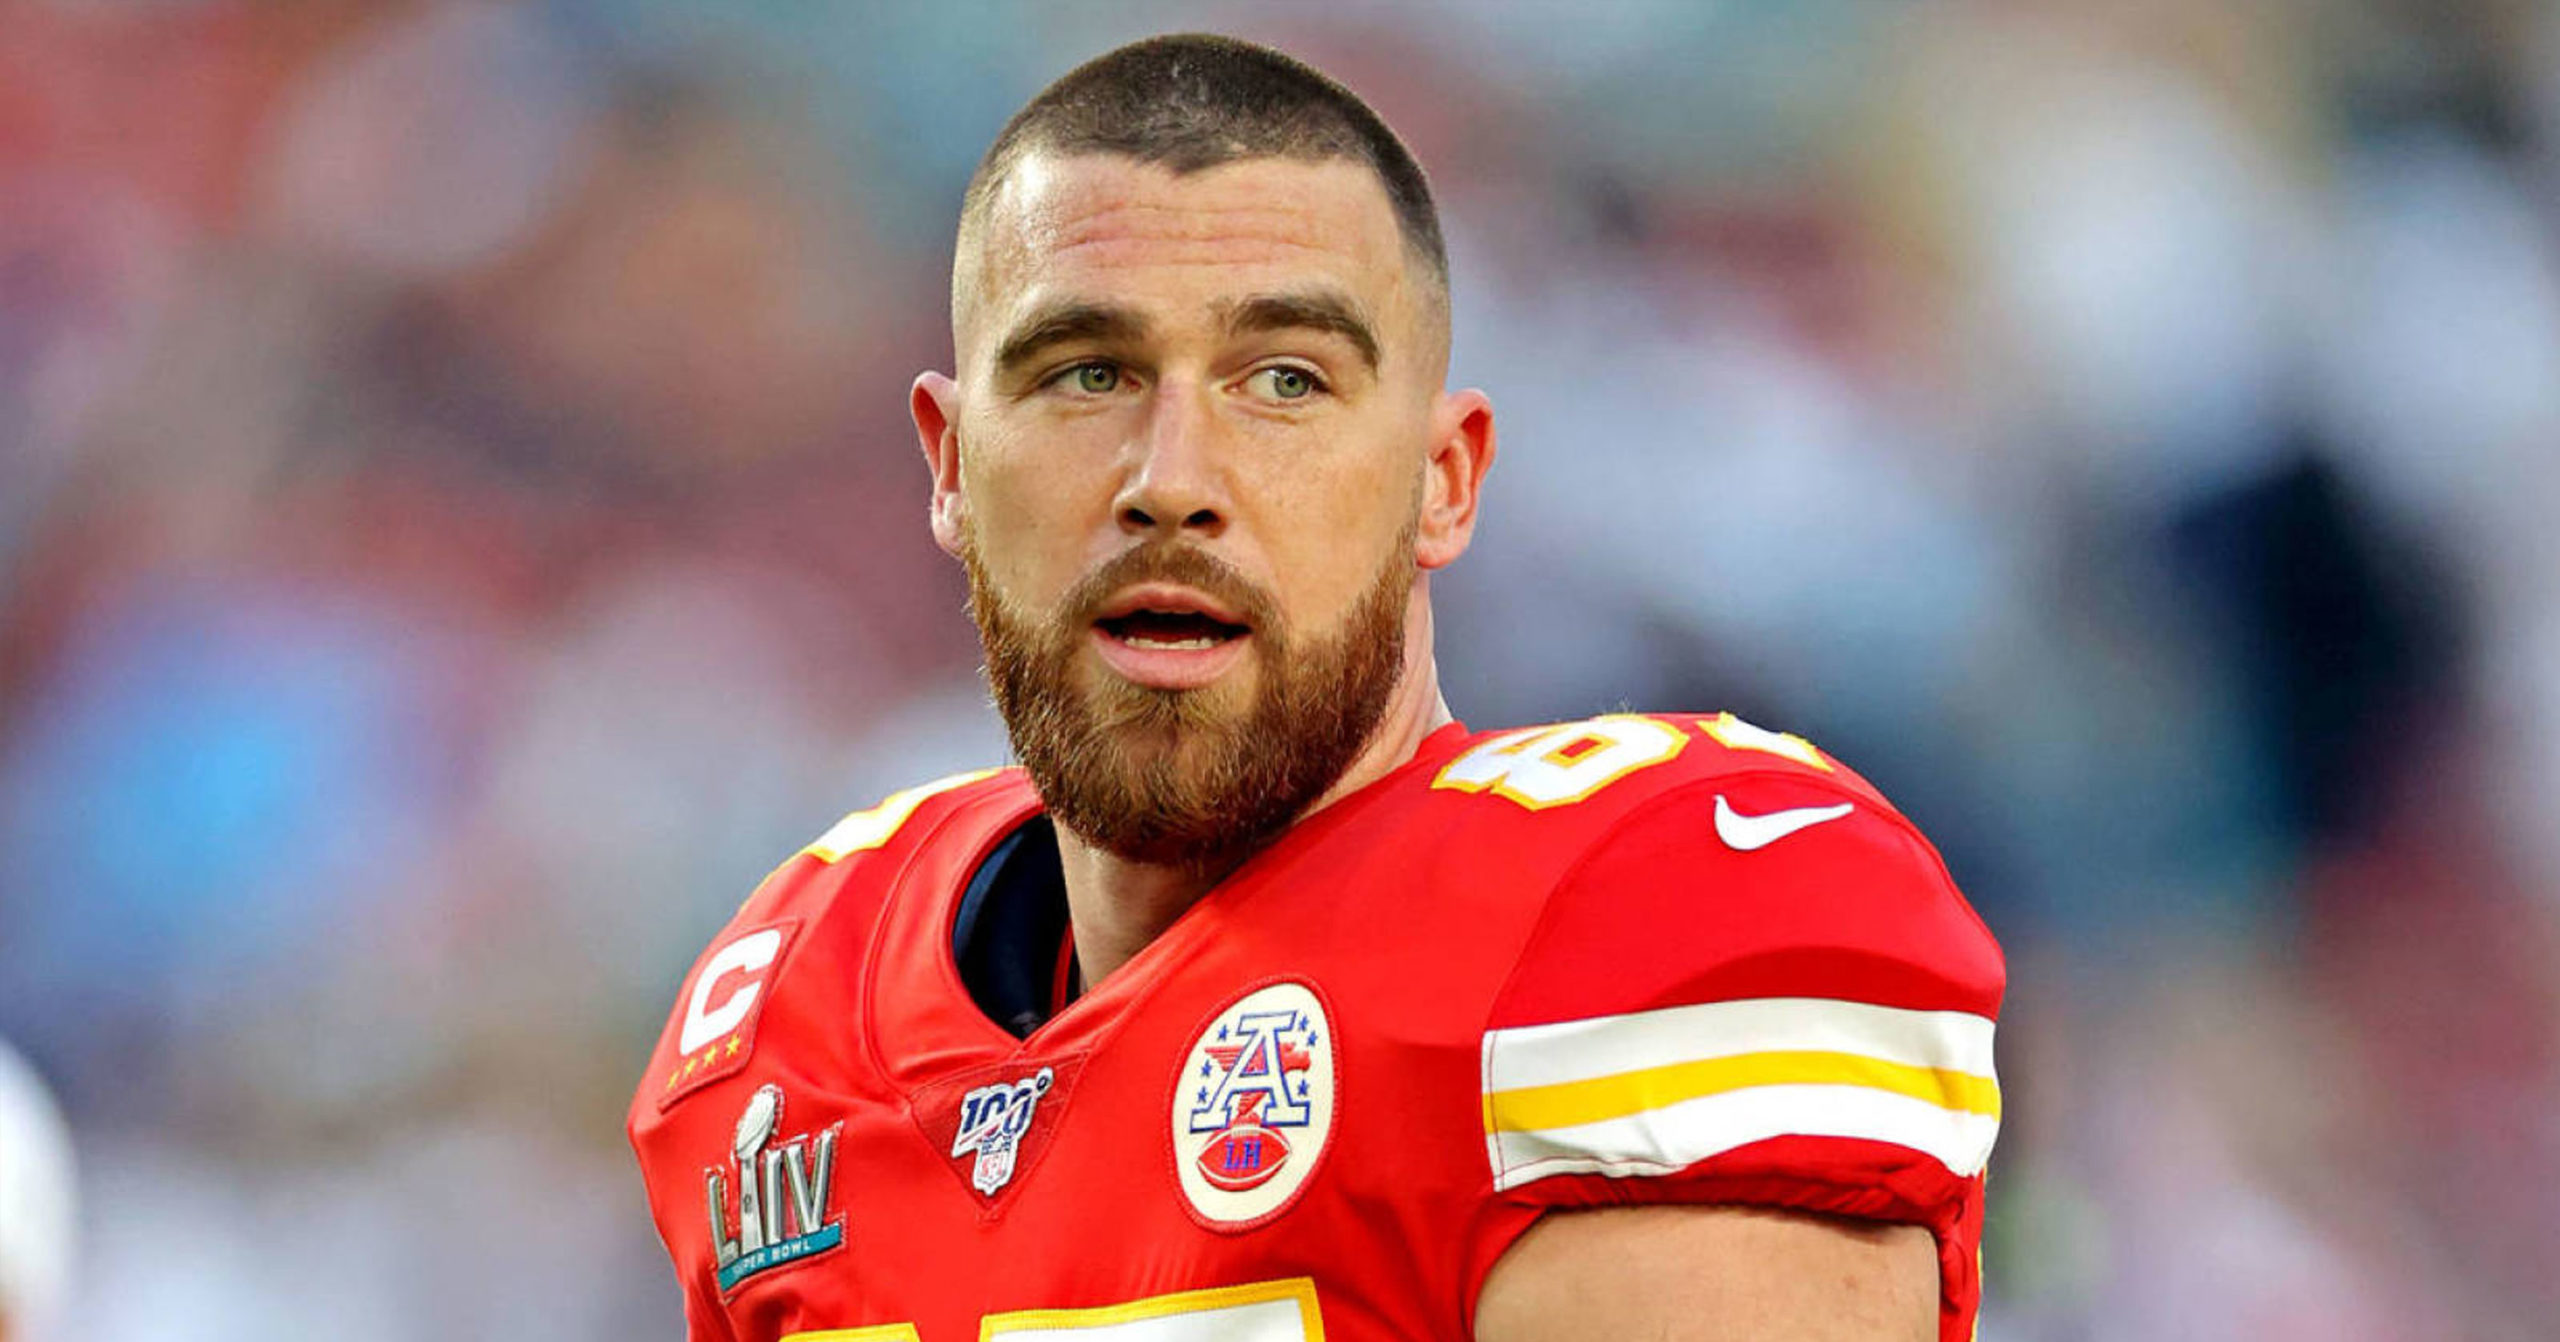 Travis Kelce “just loves this team,” says Chiefs belong in Super